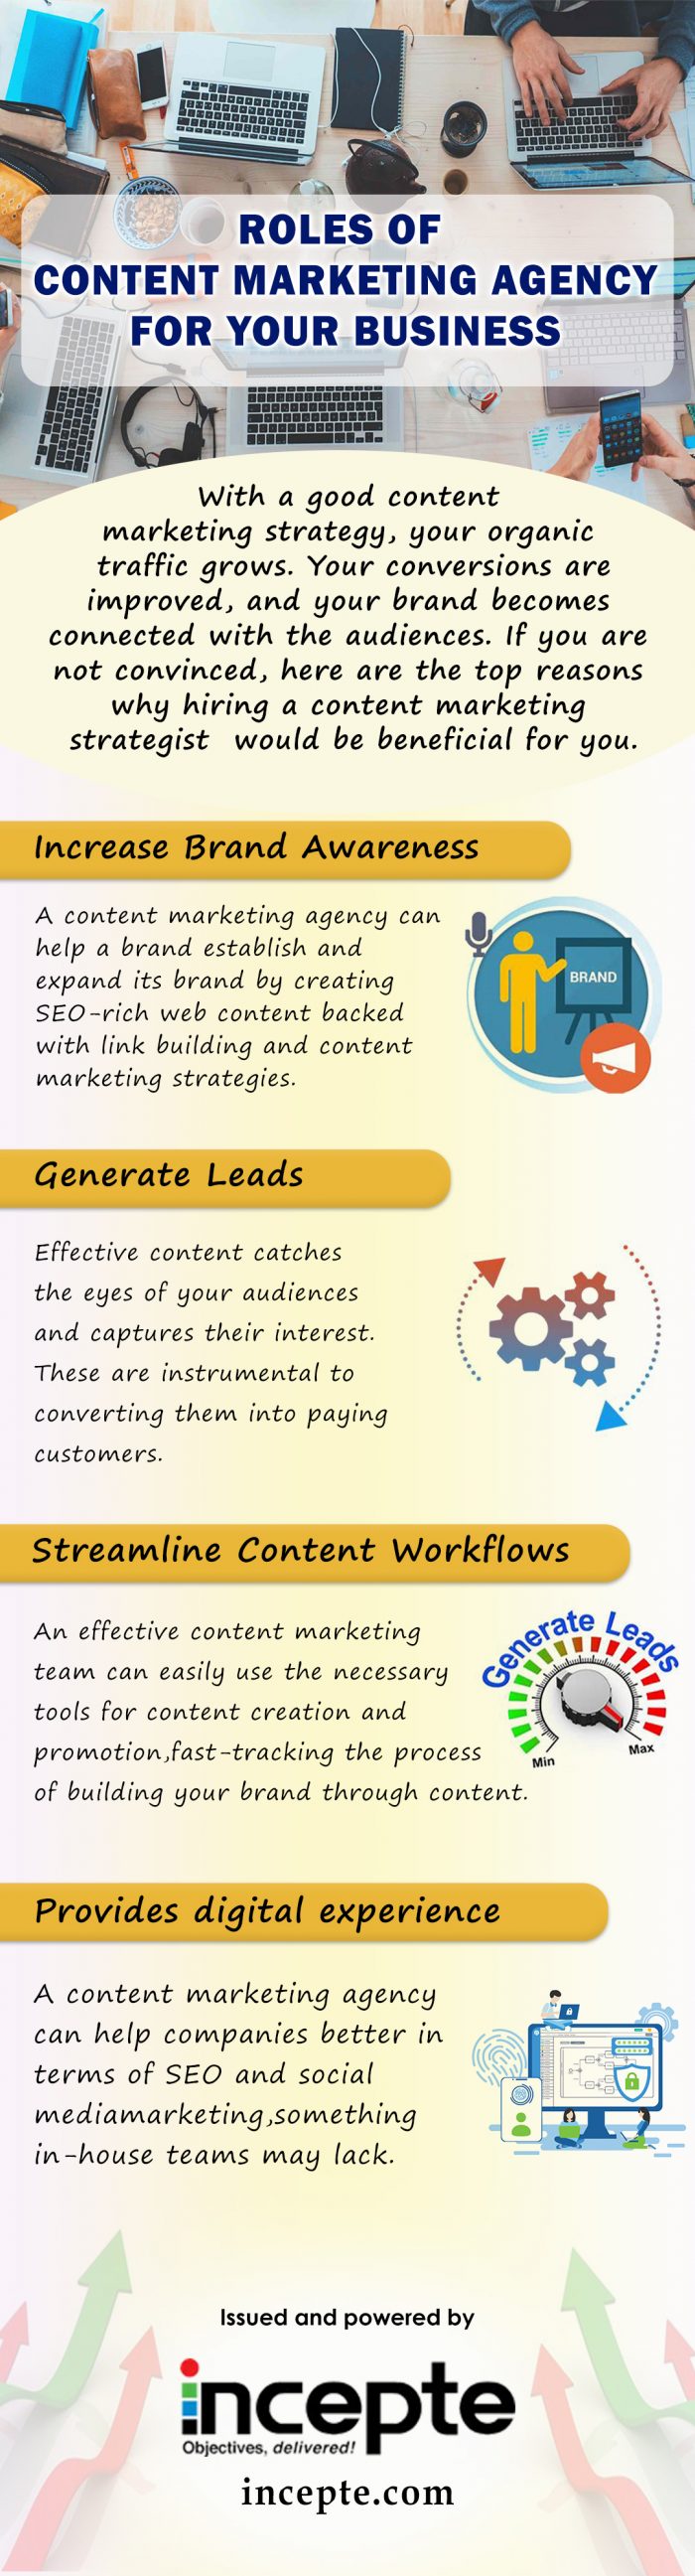 Roles of Content Marketing Agency for Your Business